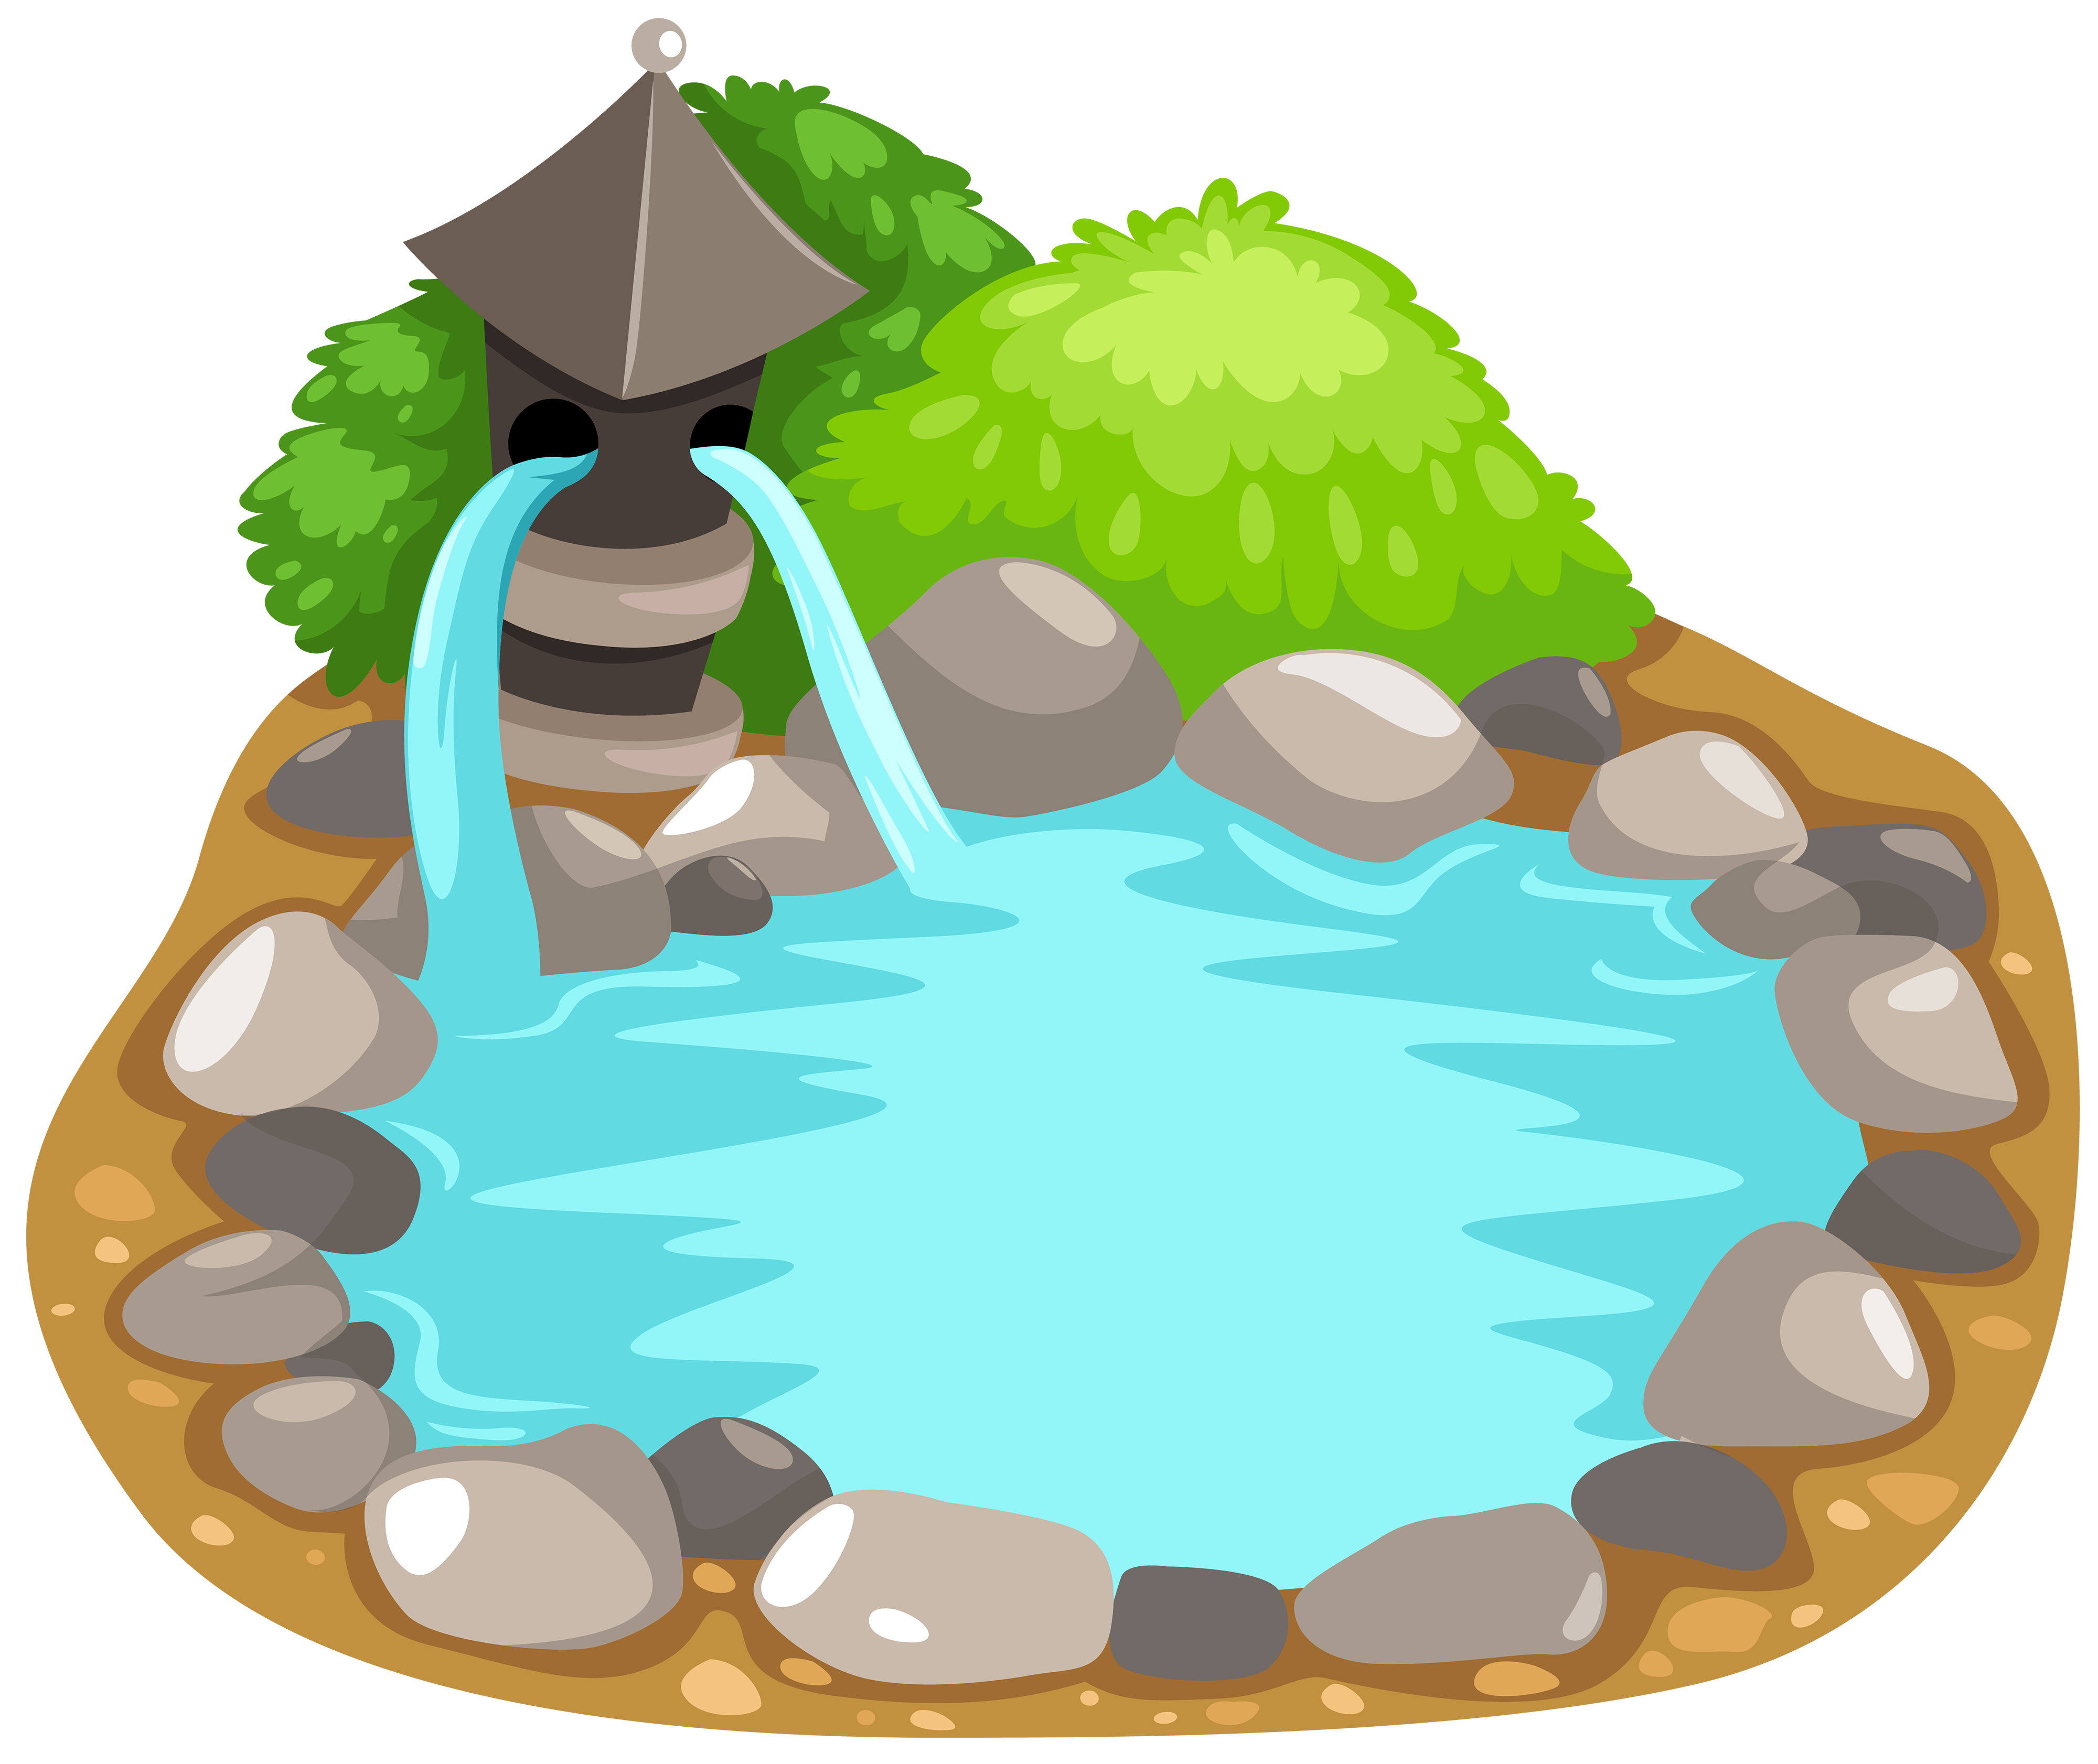 Water fountain at getdrawings. Clipart grass volleyball